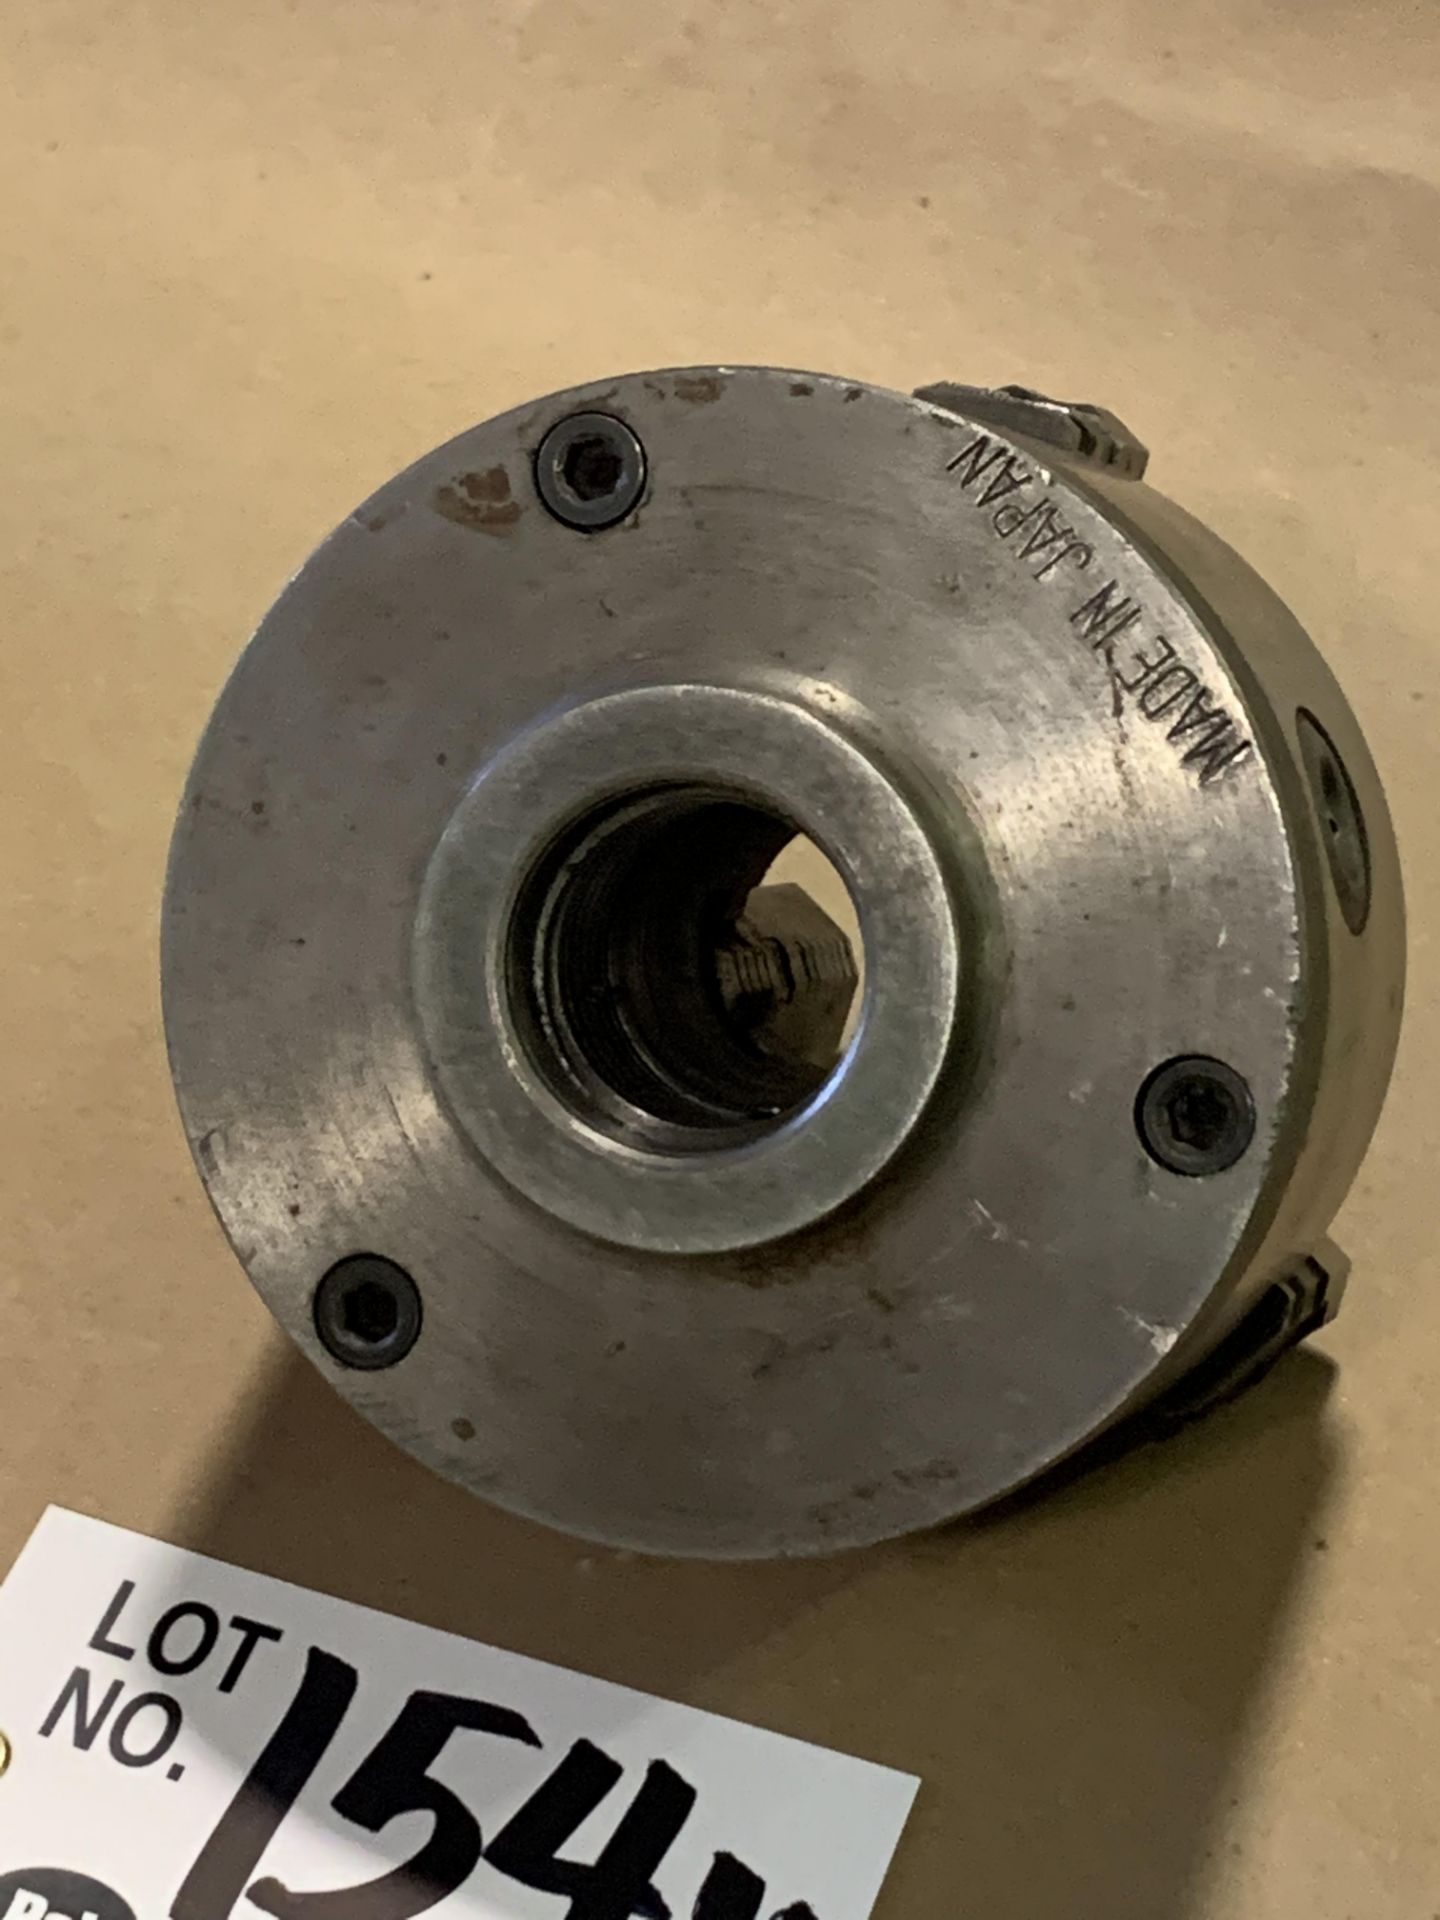 5" 3-Jaw Chuck - Image 2 of 2